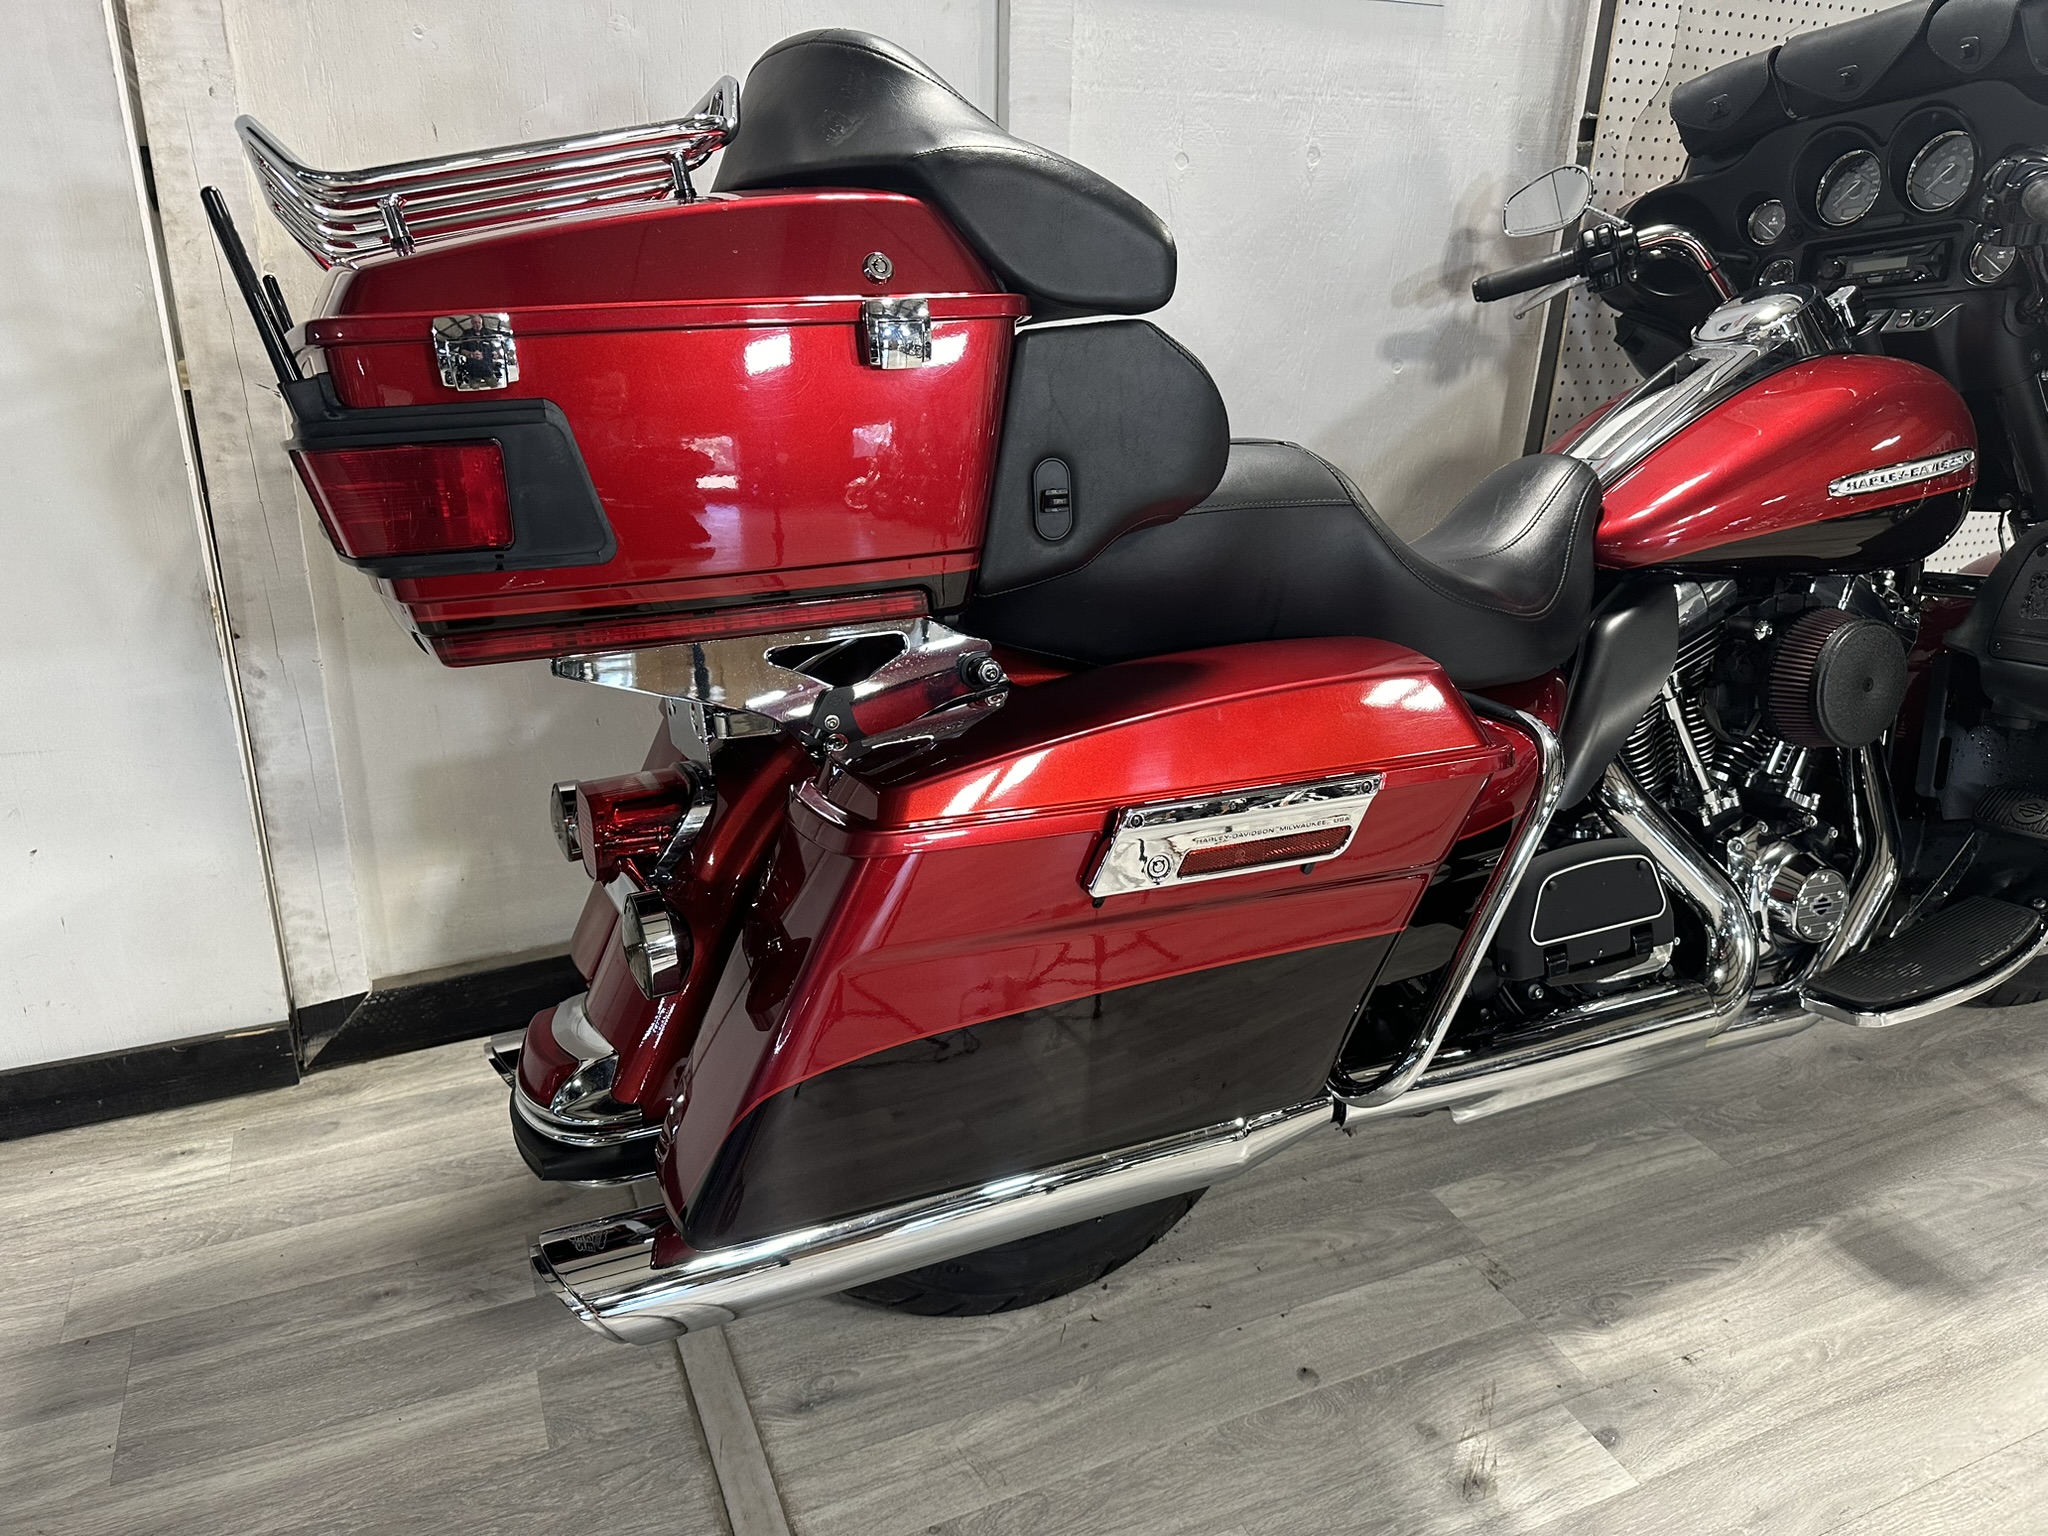 HARLEY DAVIDSON ULTRA LIMITED FOR SALE ONTARIO